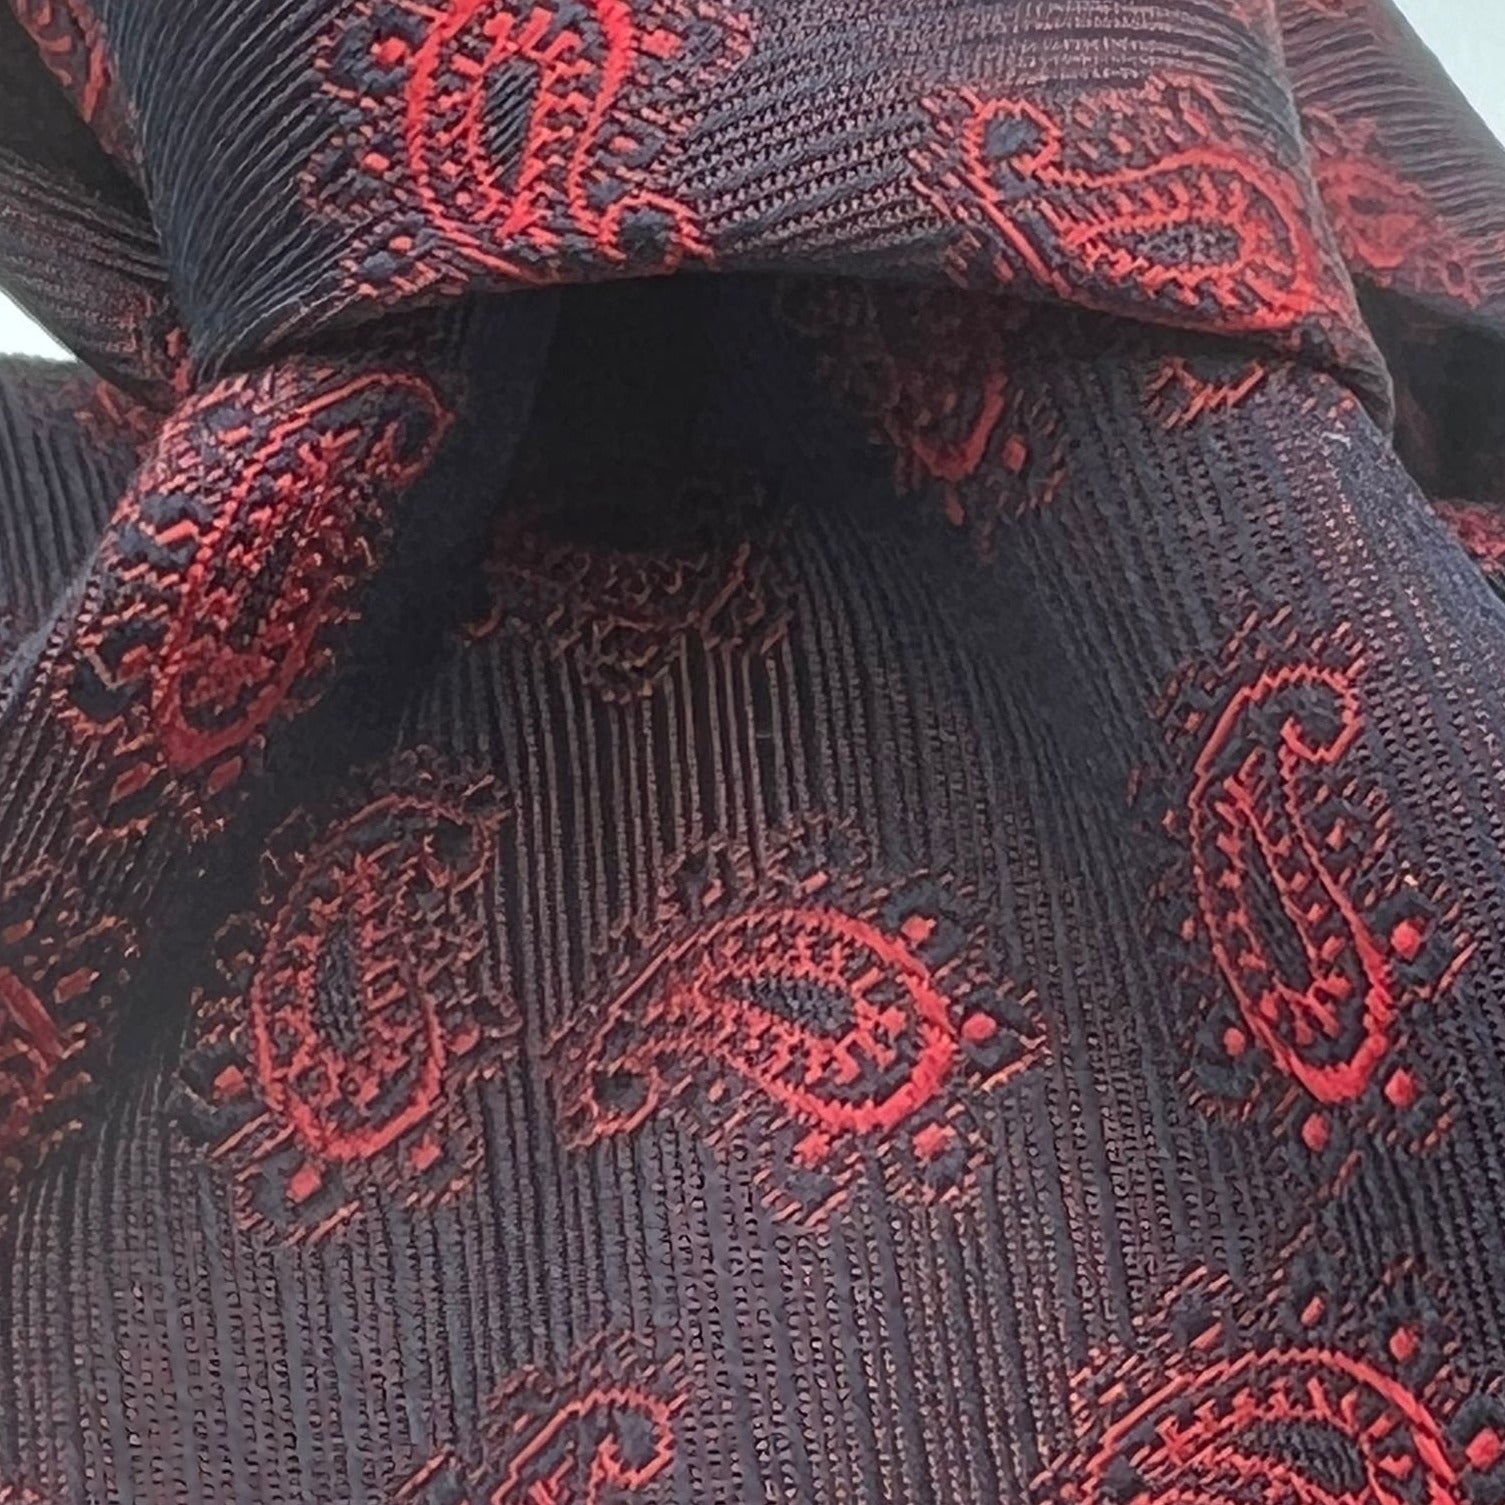 Drake's for Cruciani & Bella 100%  Woven Silk Jacquard Tipped Wine with Red Paisley Motif Tie Handmade in London, England 9 cm x 148 cm #6864